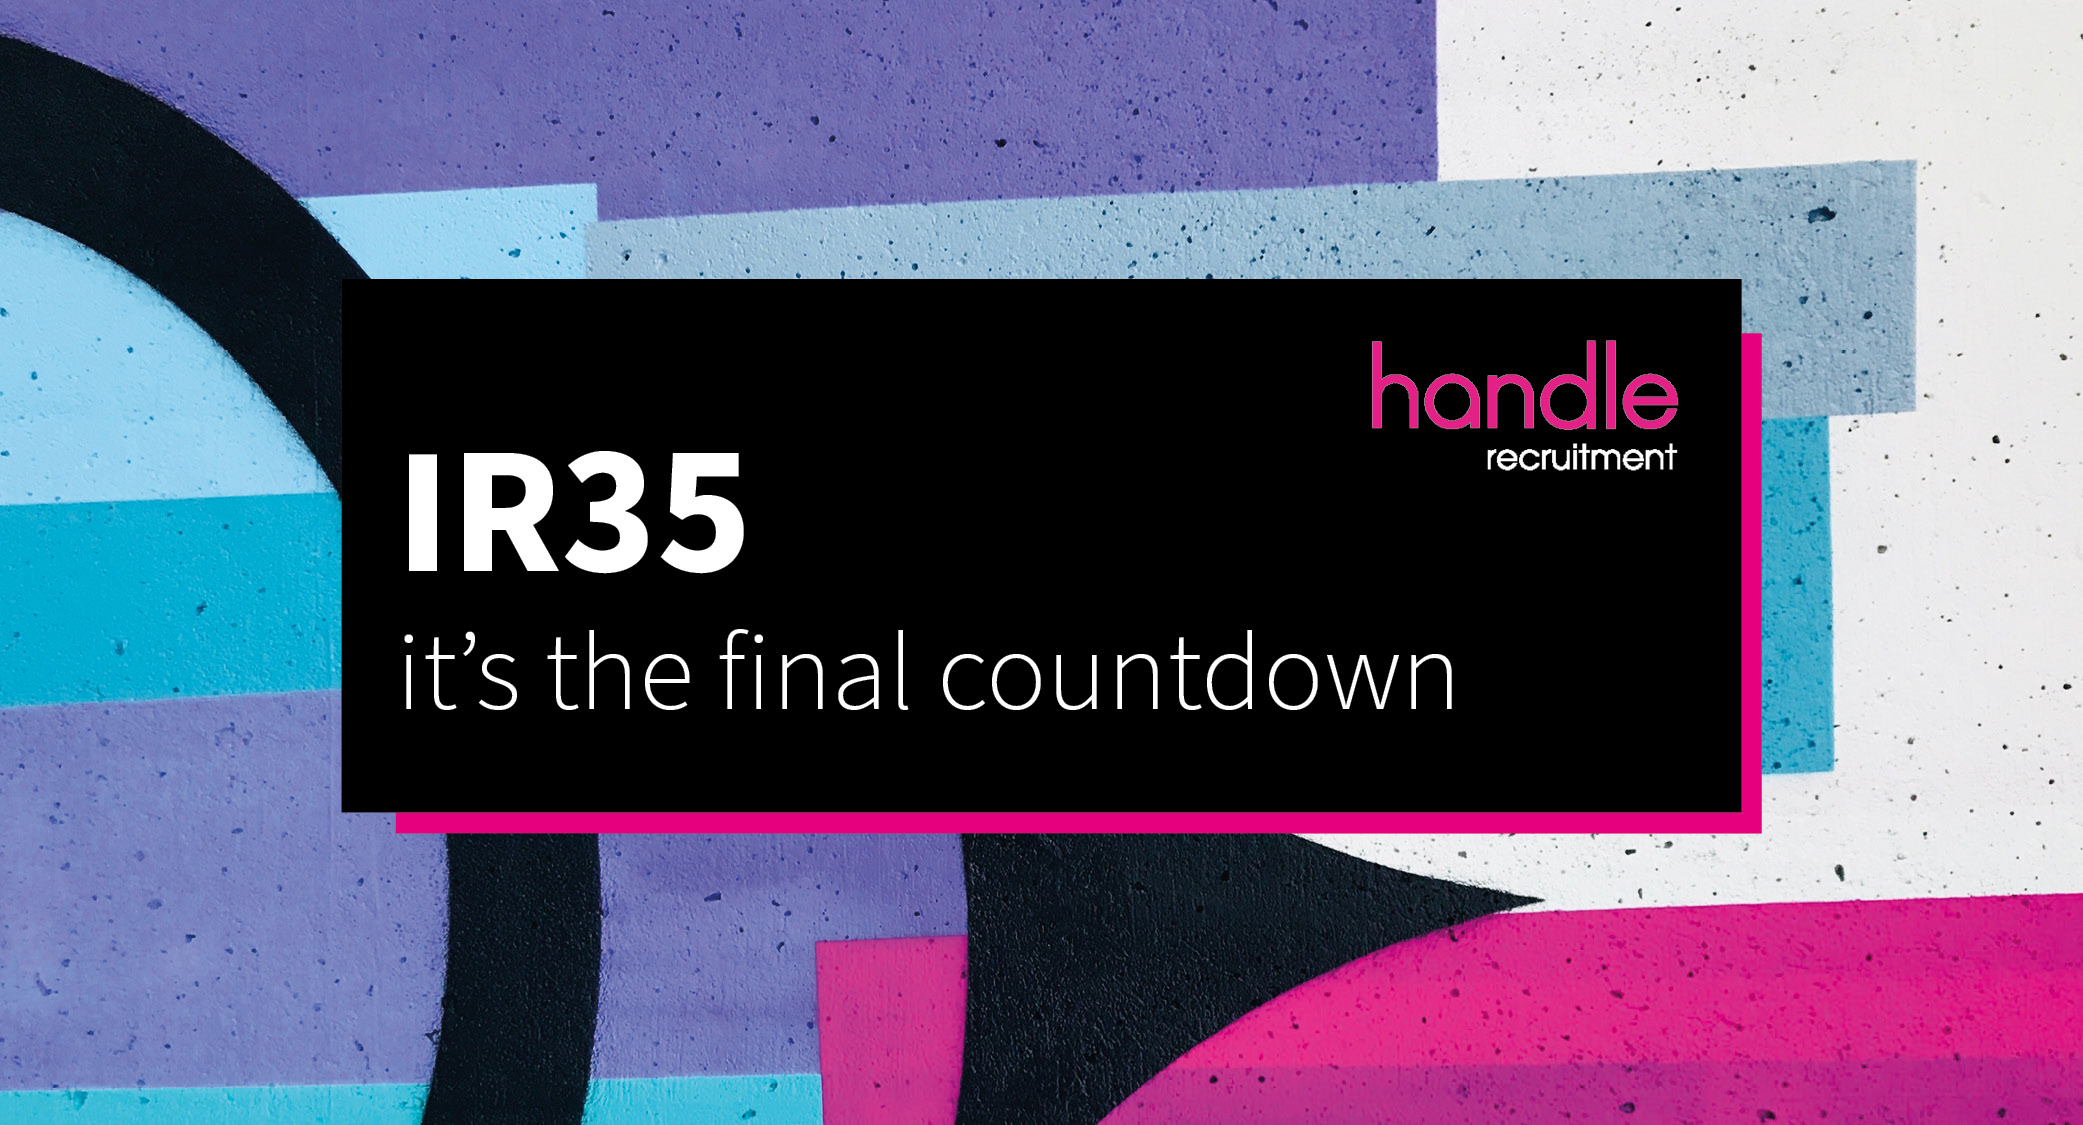 IR35: it's the final countdown - are you prepared?